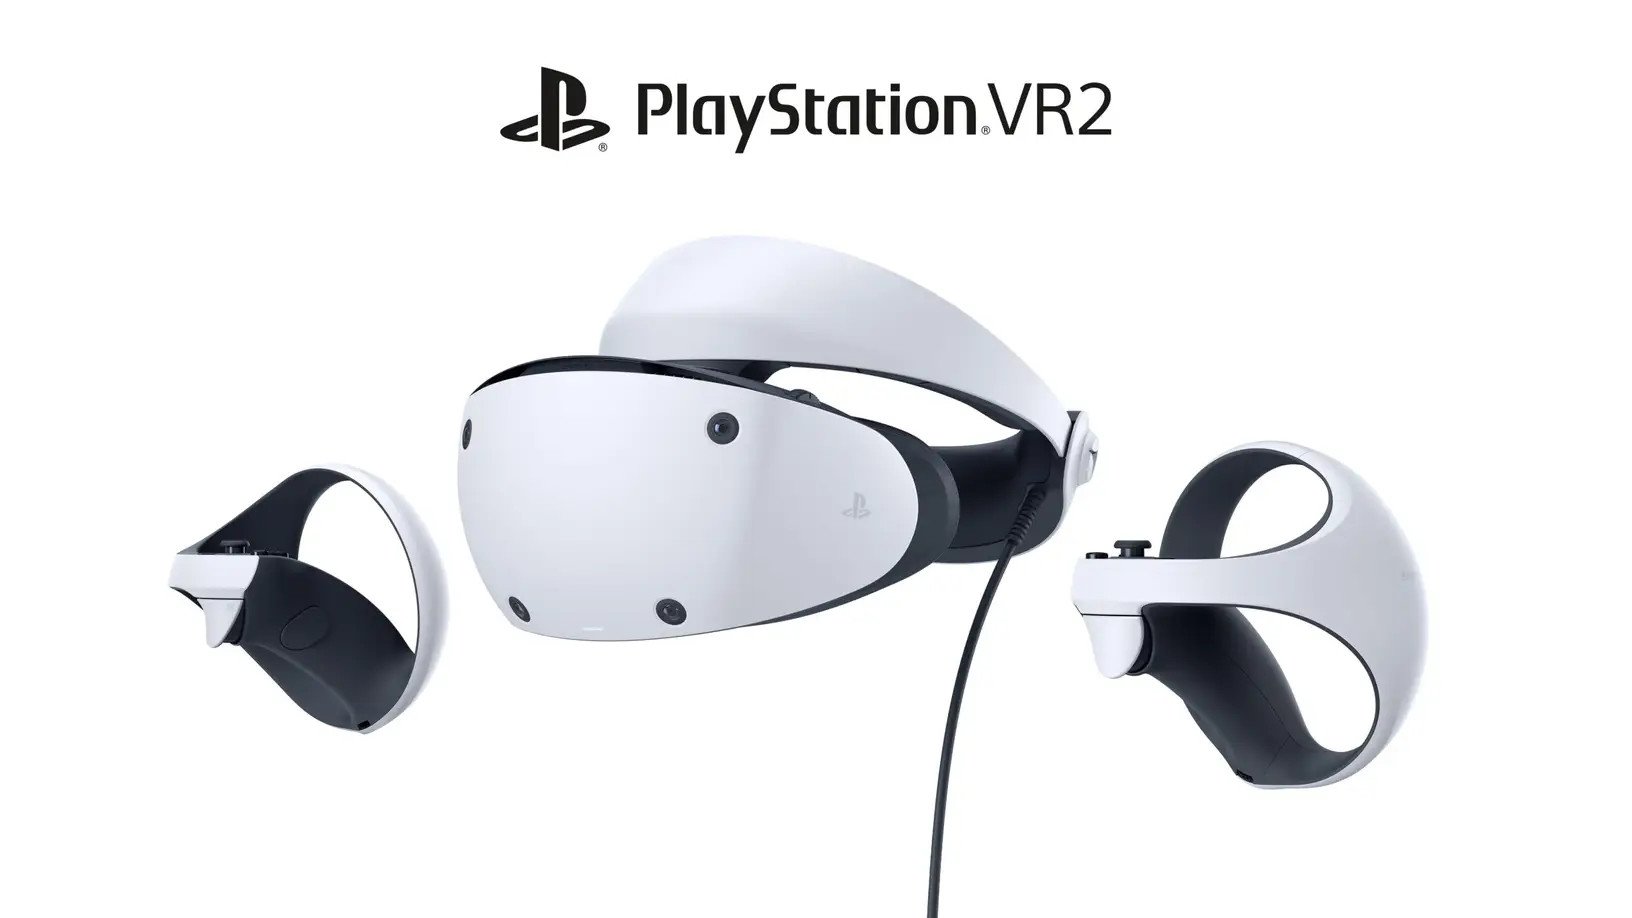 This is what the PS VR2 headset looks like